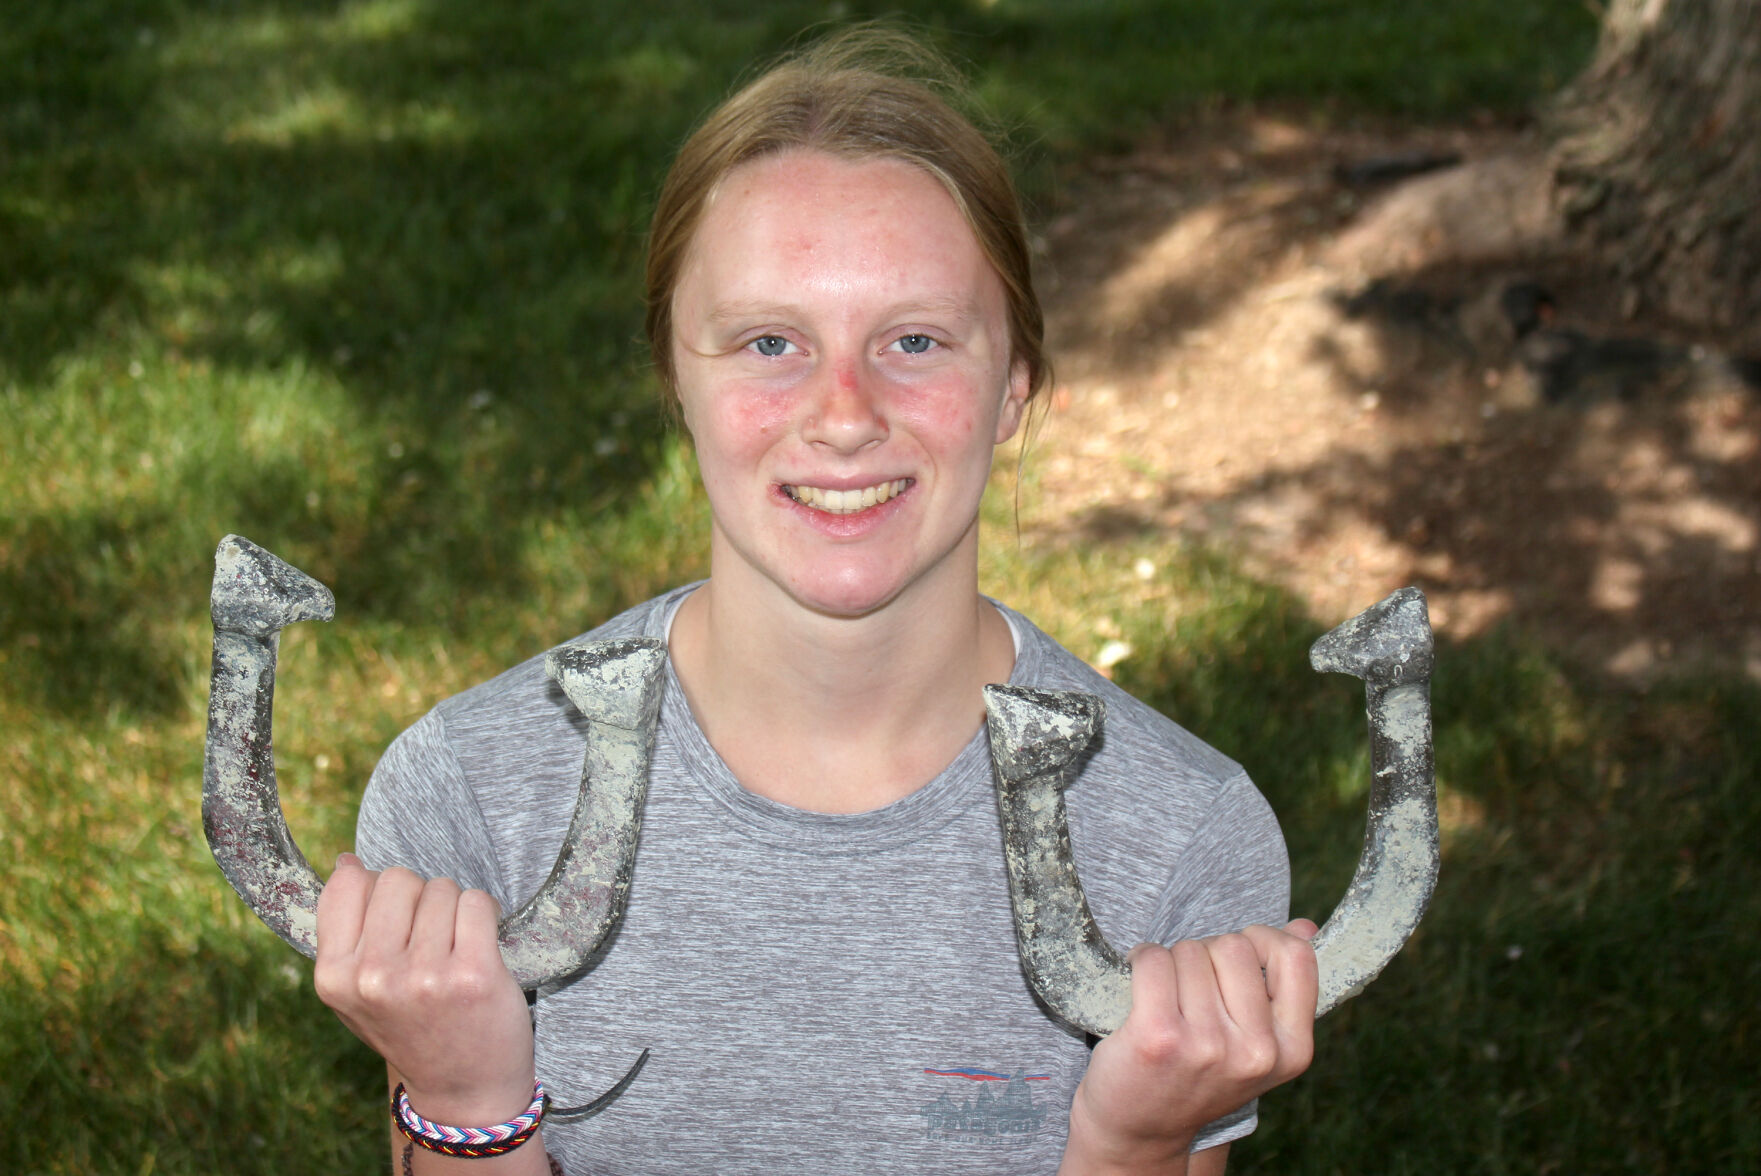 Local Horseshoes How 16-year old Sarah Chaffee has already become a womens world adult horseshoe champ and is aiming to repeat photo